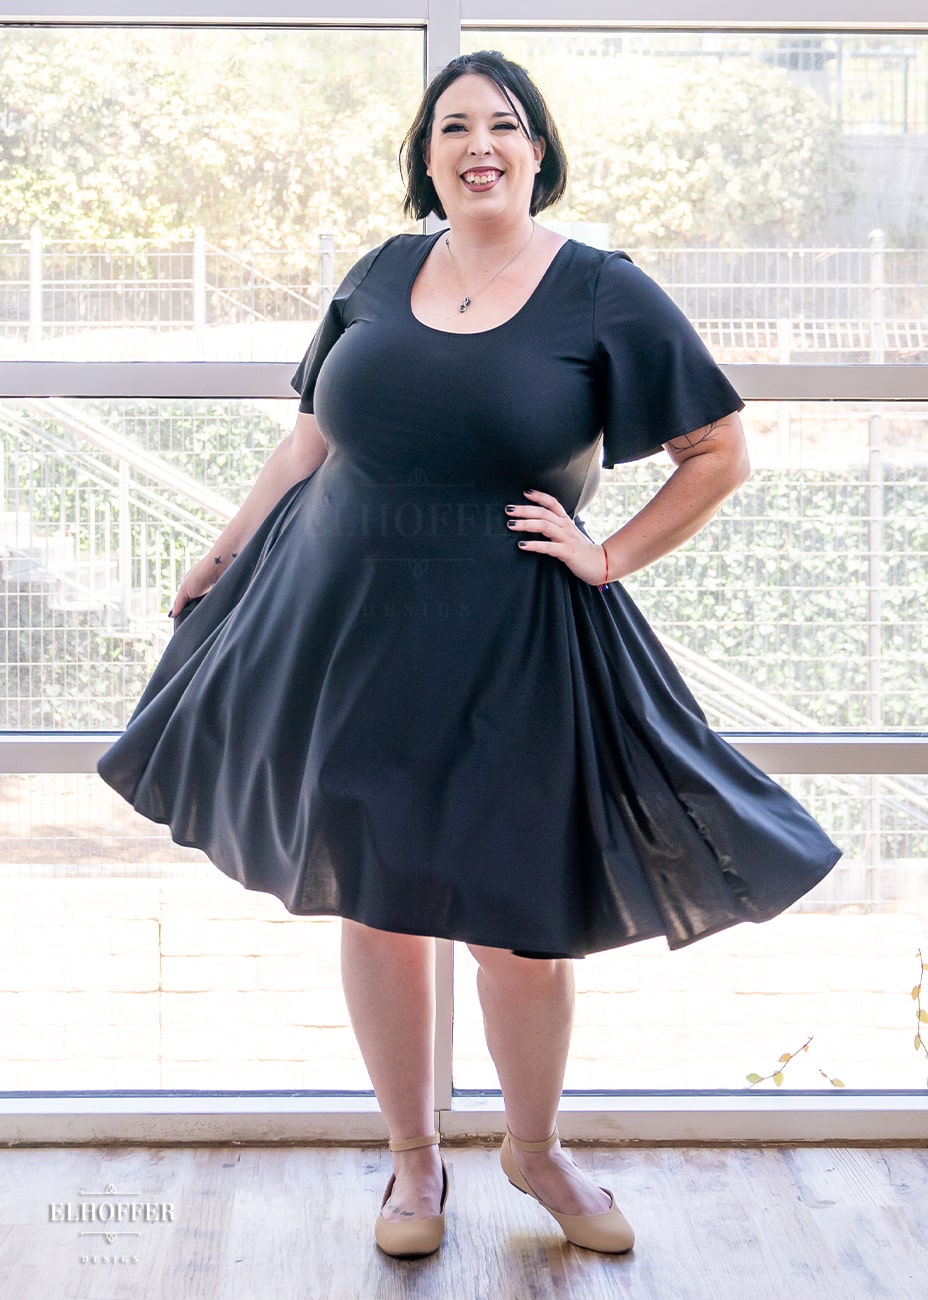 Katie Lynn, a size 2XL fair skinned model with short dark hair, is wearing a knee-length pullover dress with scoop neck, flutter sleeves, and side pockets in black.